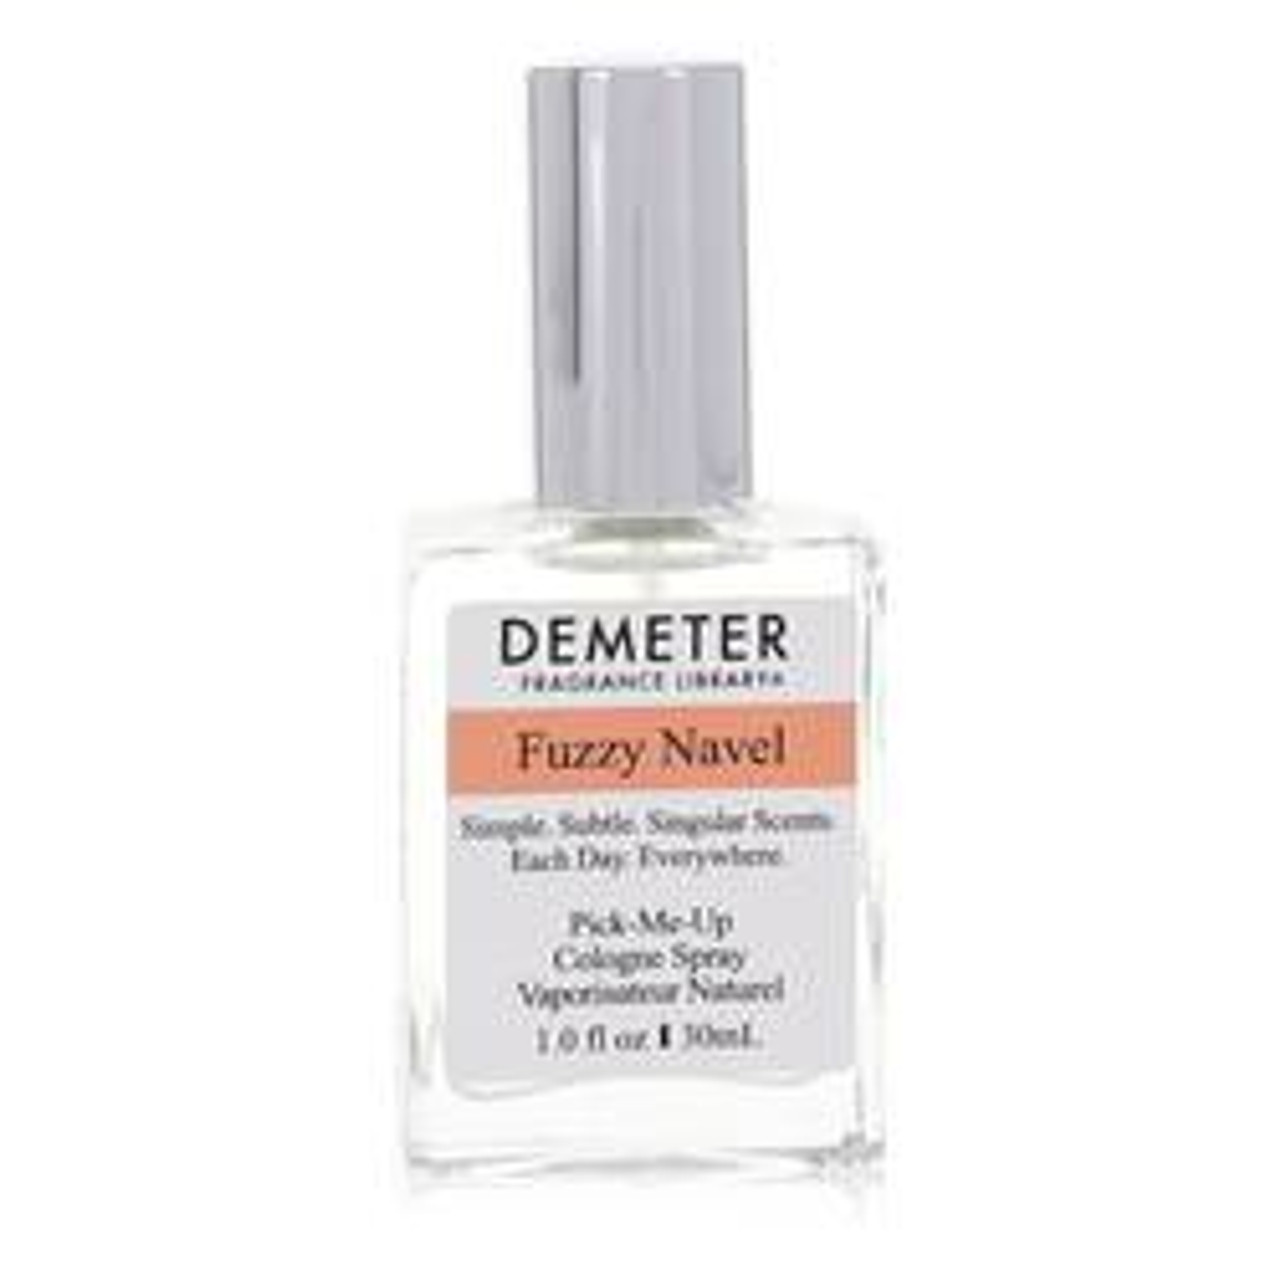 Demeter Fuzzy Navel Perfume By Demeter Cologne Spray 1 oz for Women - [From 35.00 - Choose pk Qty ] - *Ships from Miami